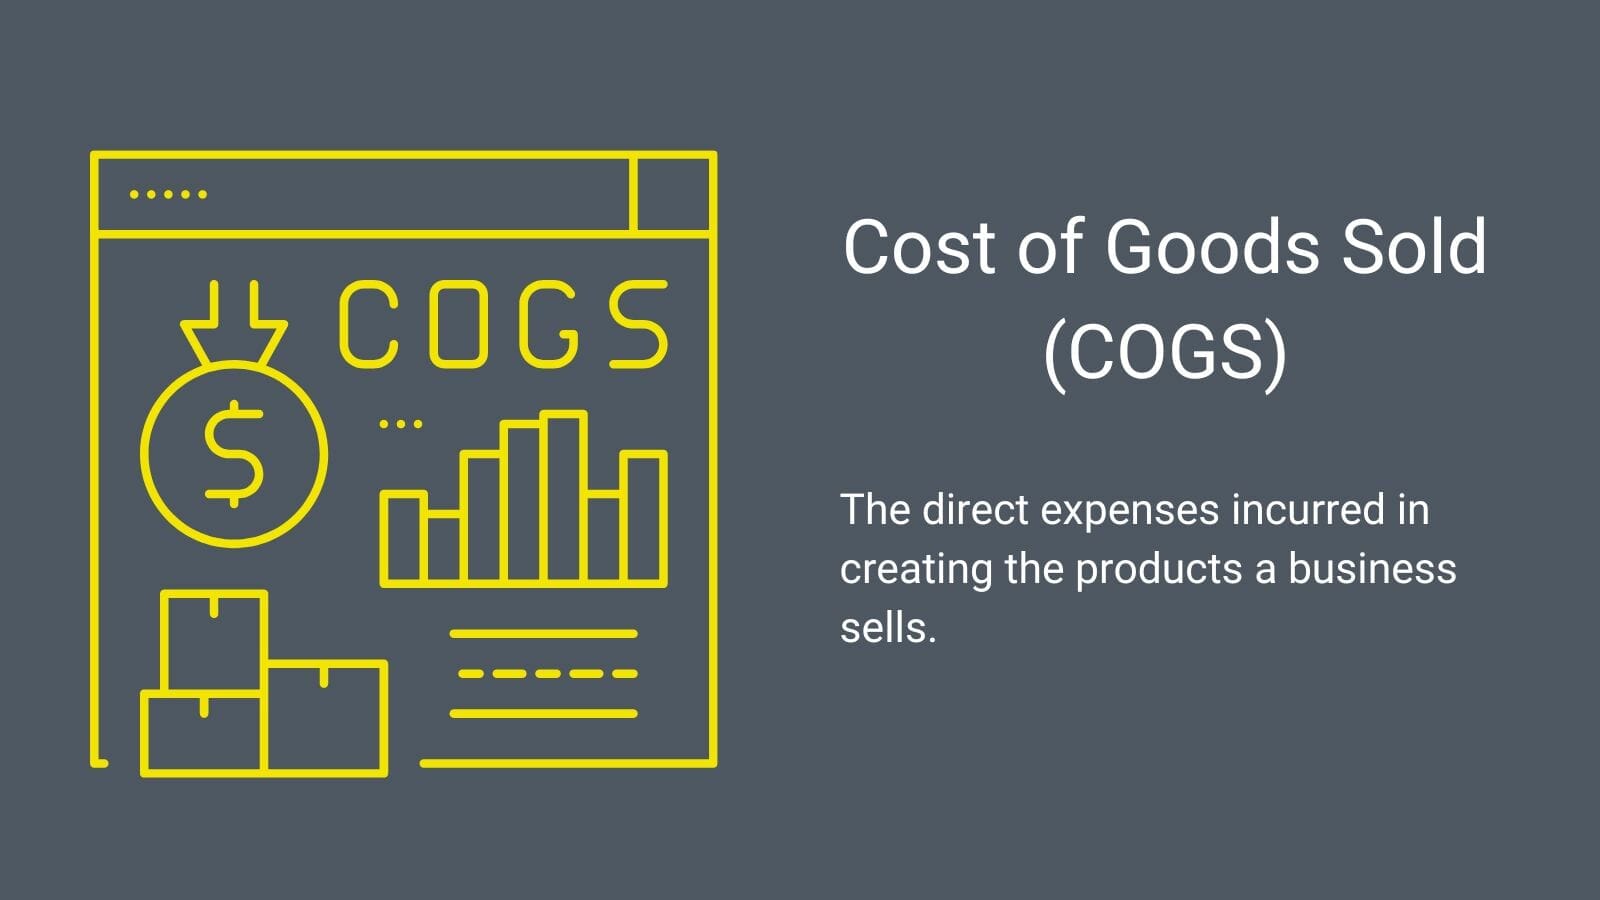 What are Cost of Goods Sold and What's Included in it?